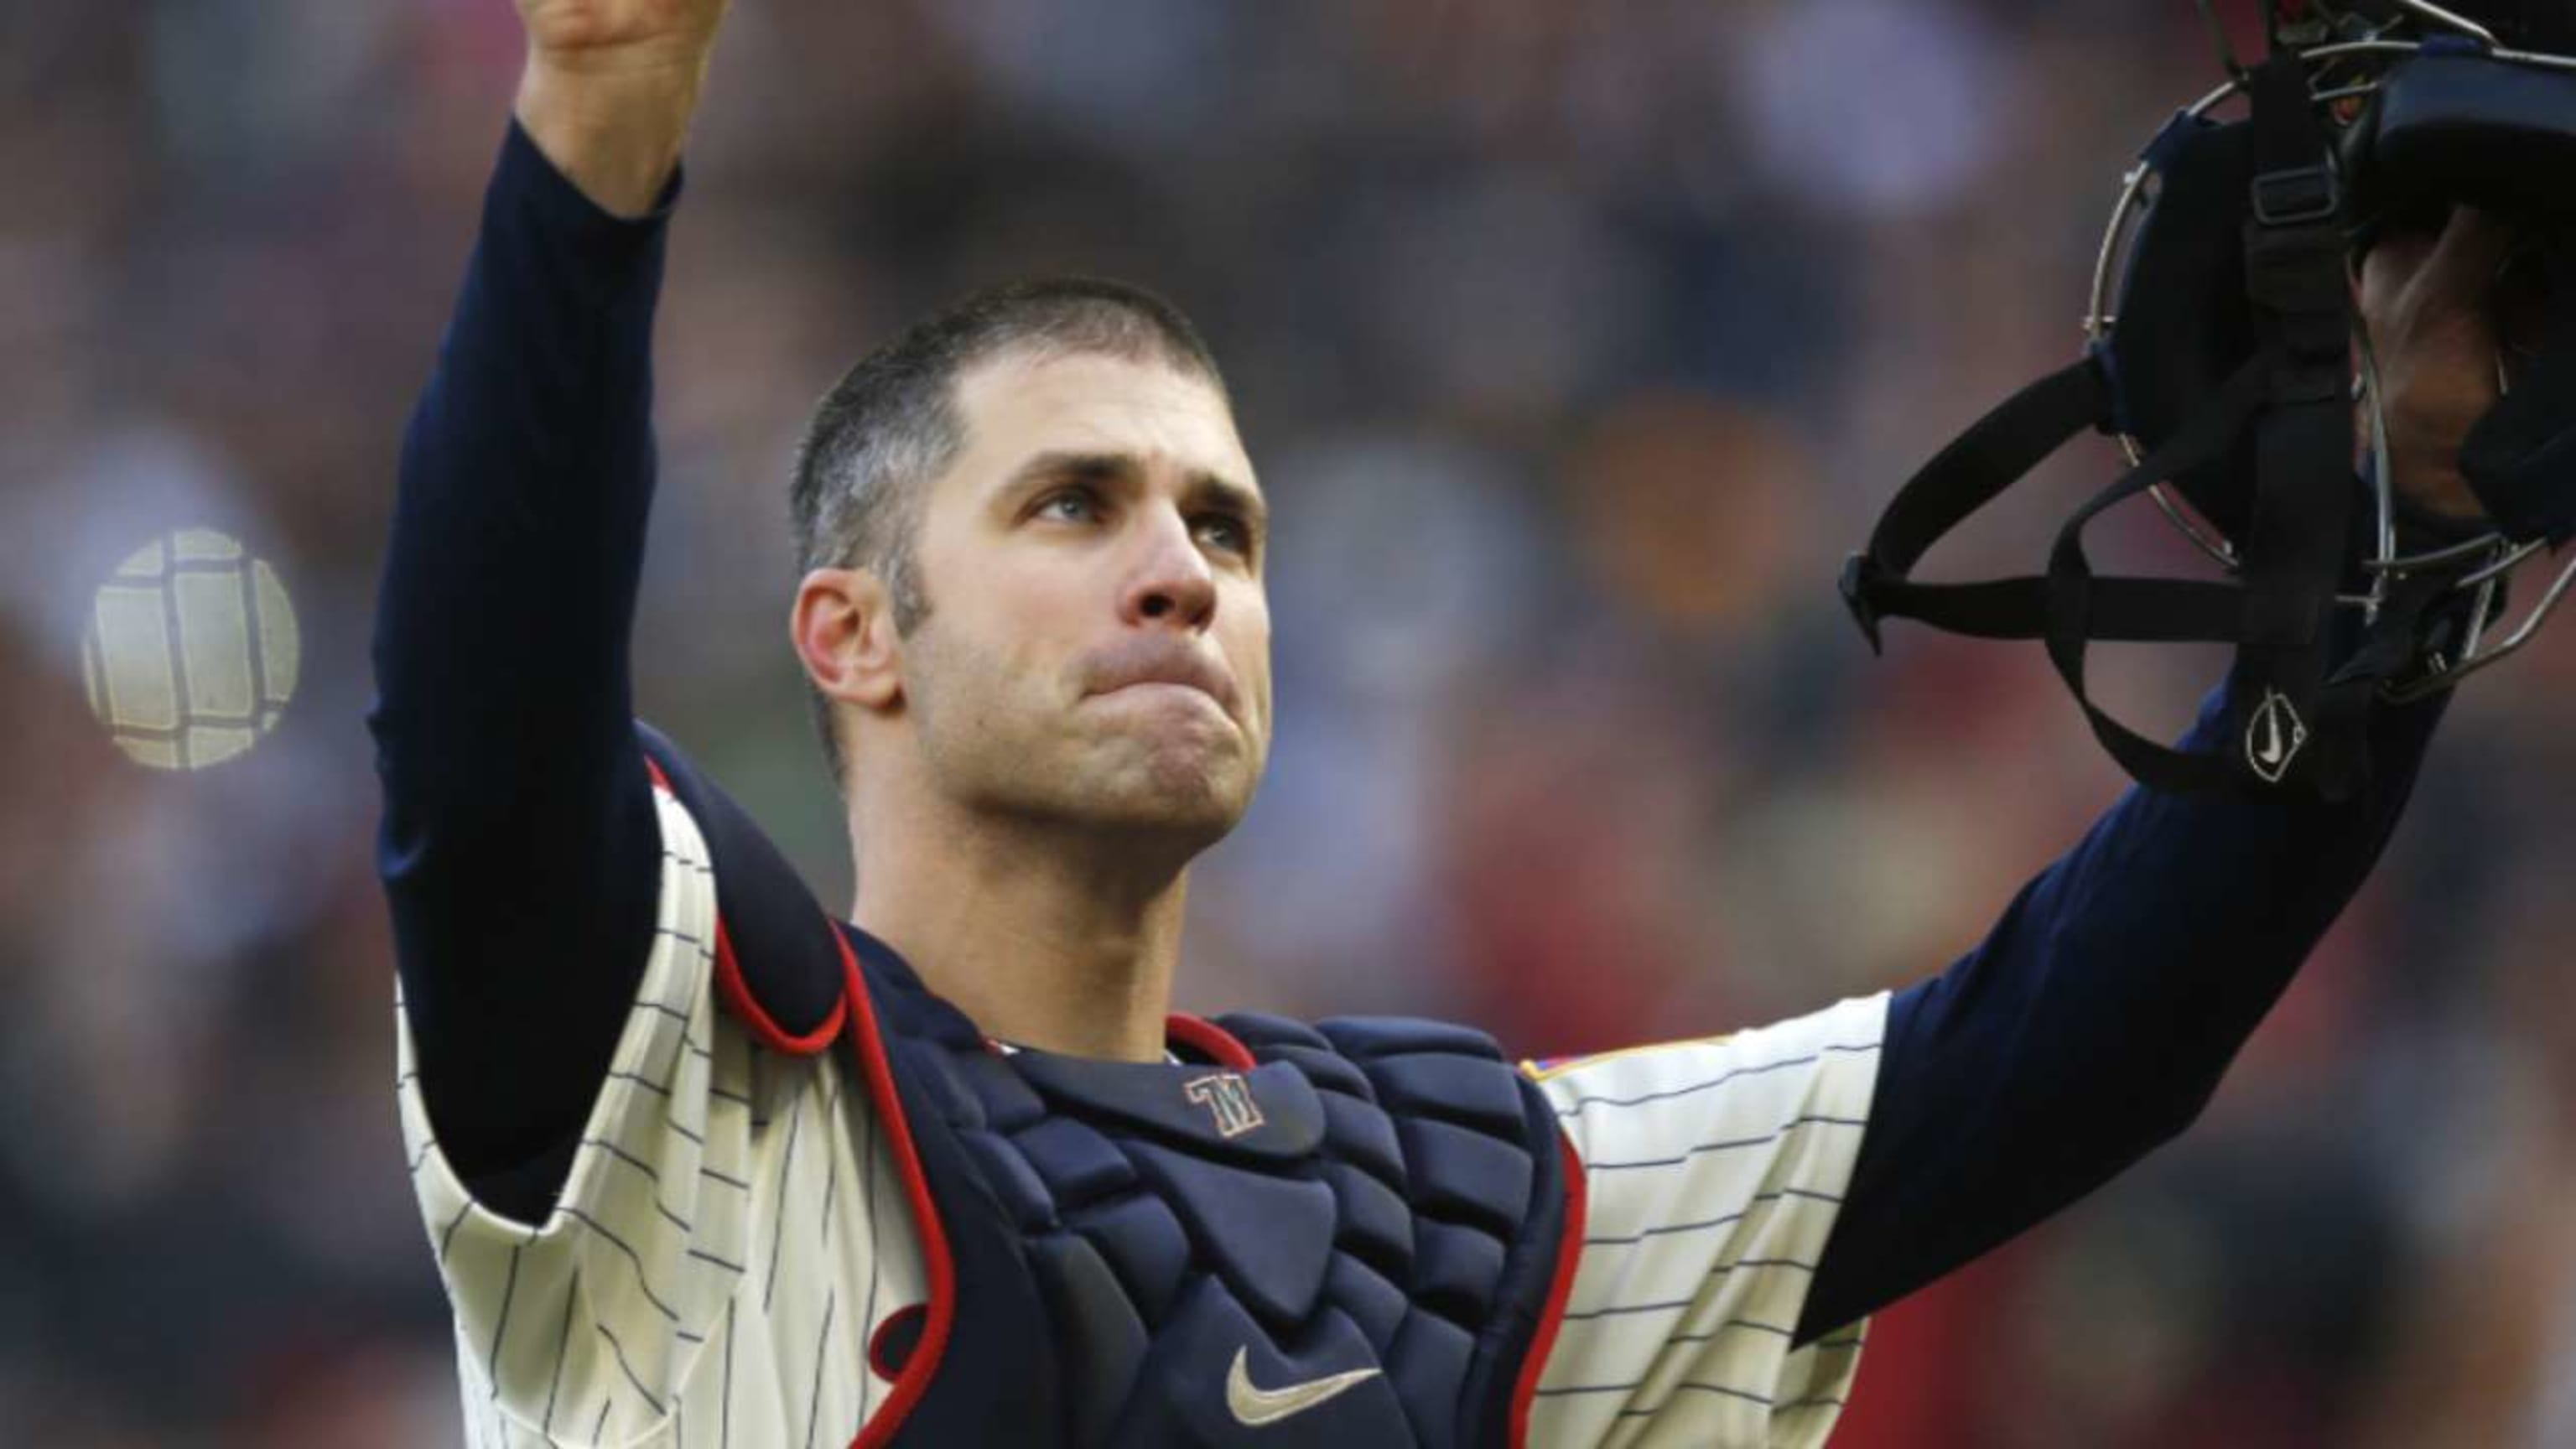 Joe Mauer elected to Twins Hall of Fame. Is Cooperstown next? - InForum